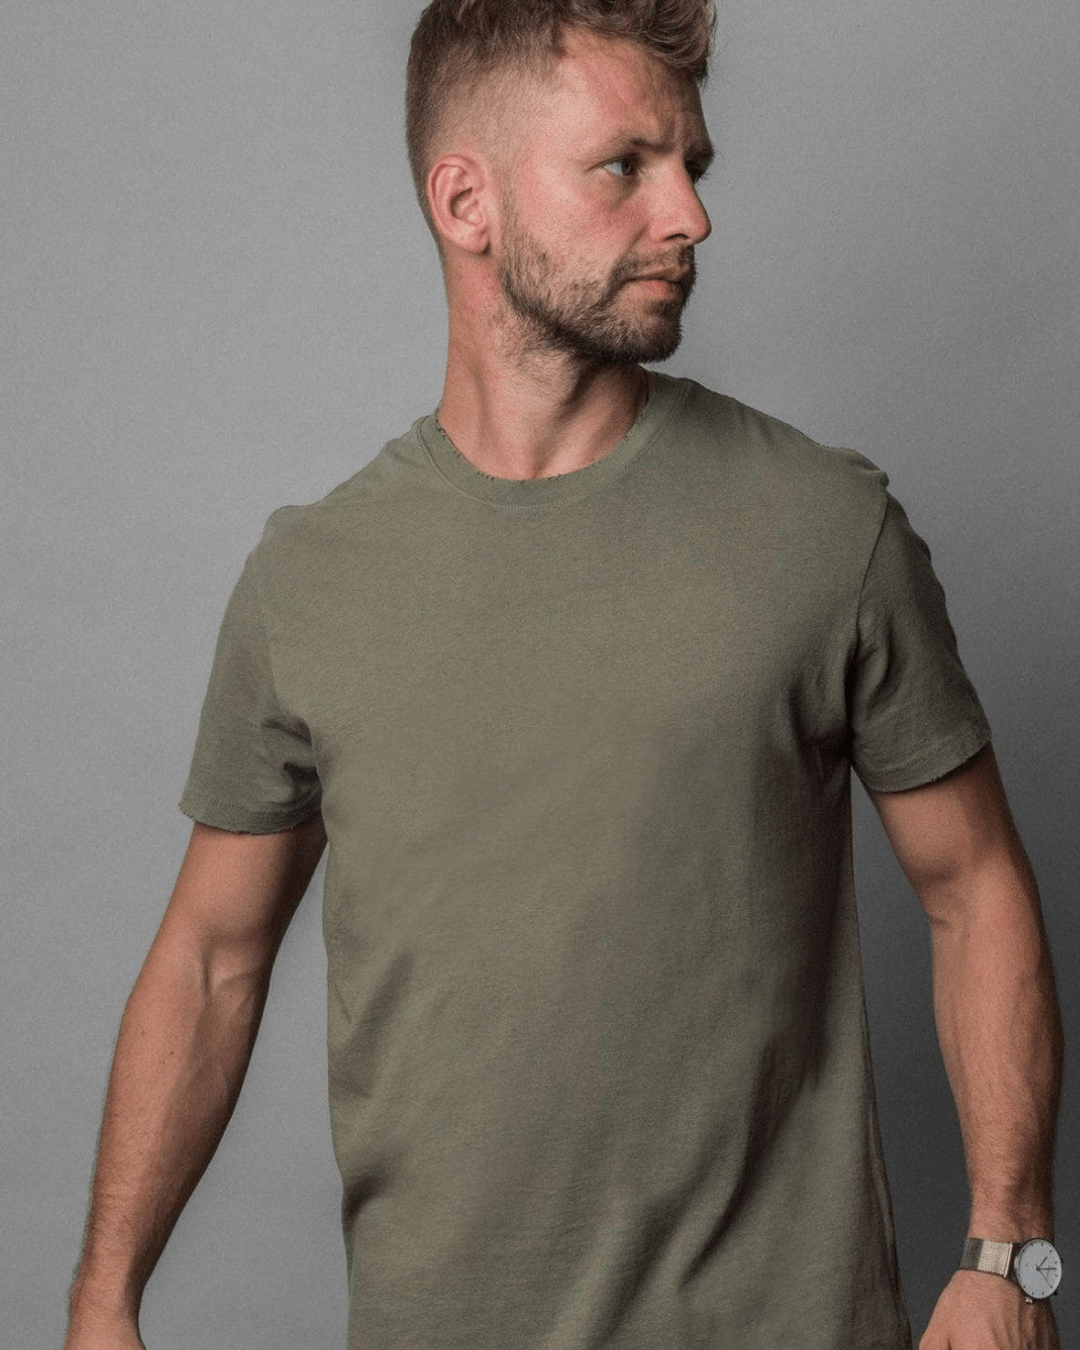 Classic Distressed Tee - Military